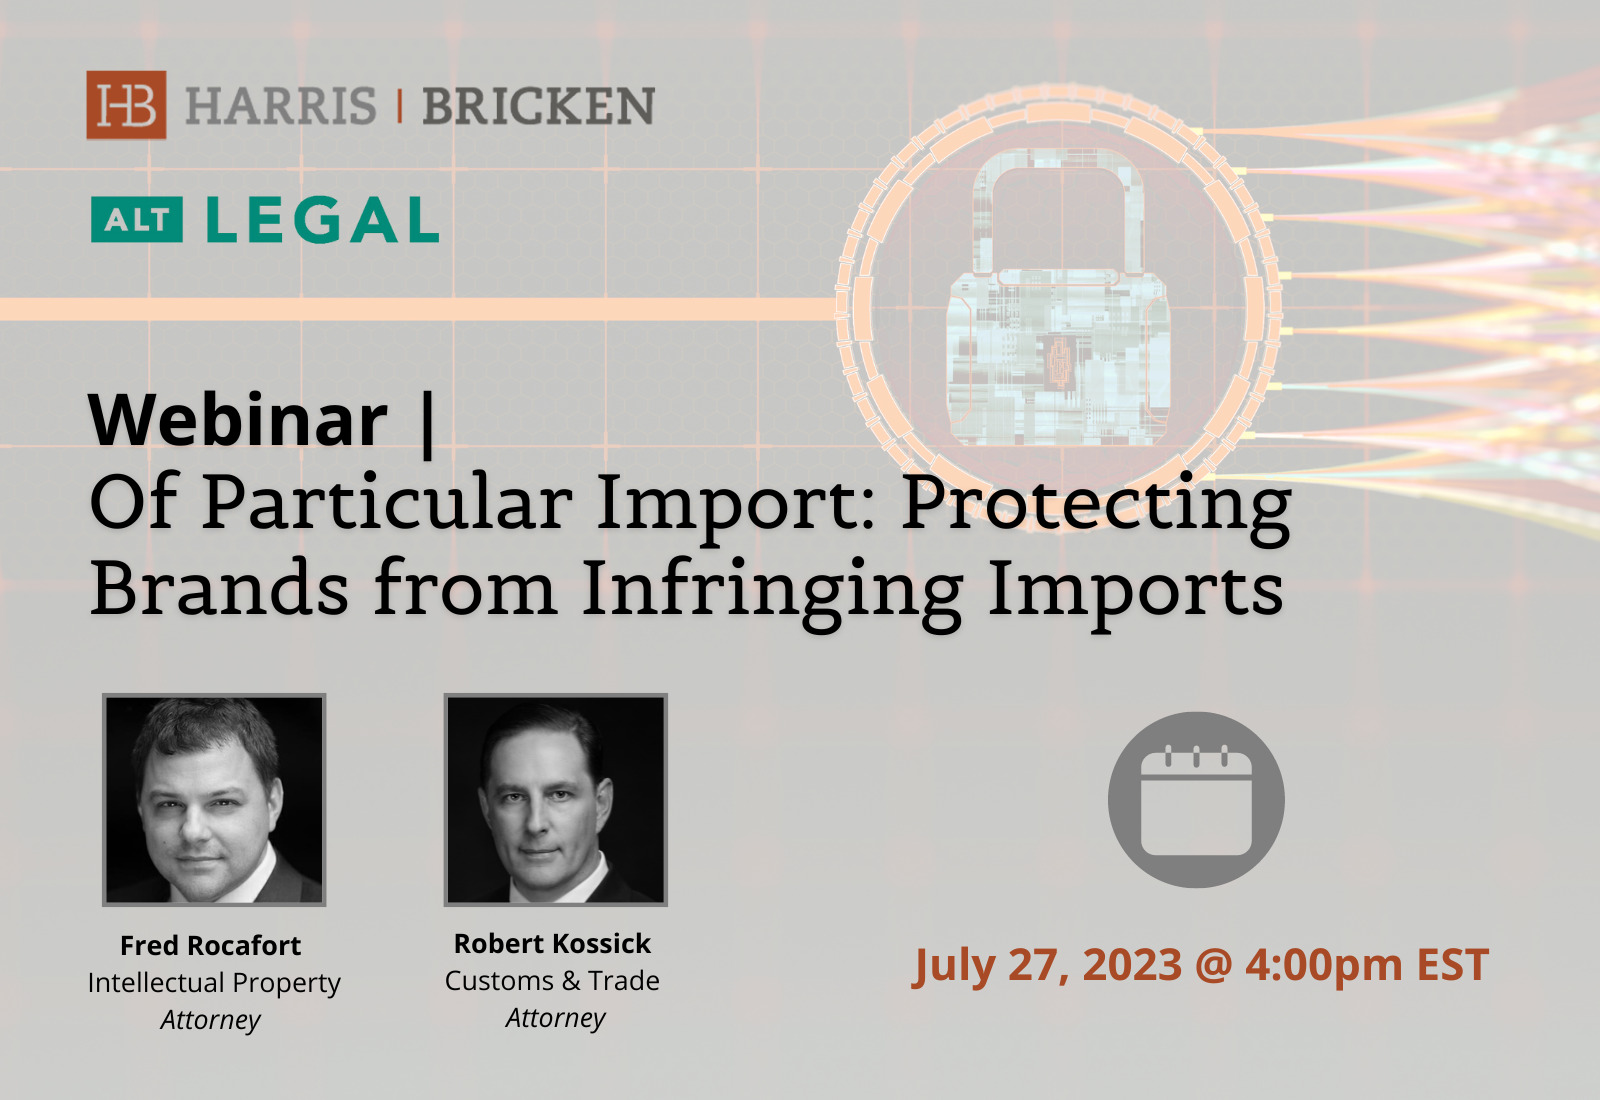 Alt Legal Webinar | Of Particular Import: Protecting Brands from Infringing Imports